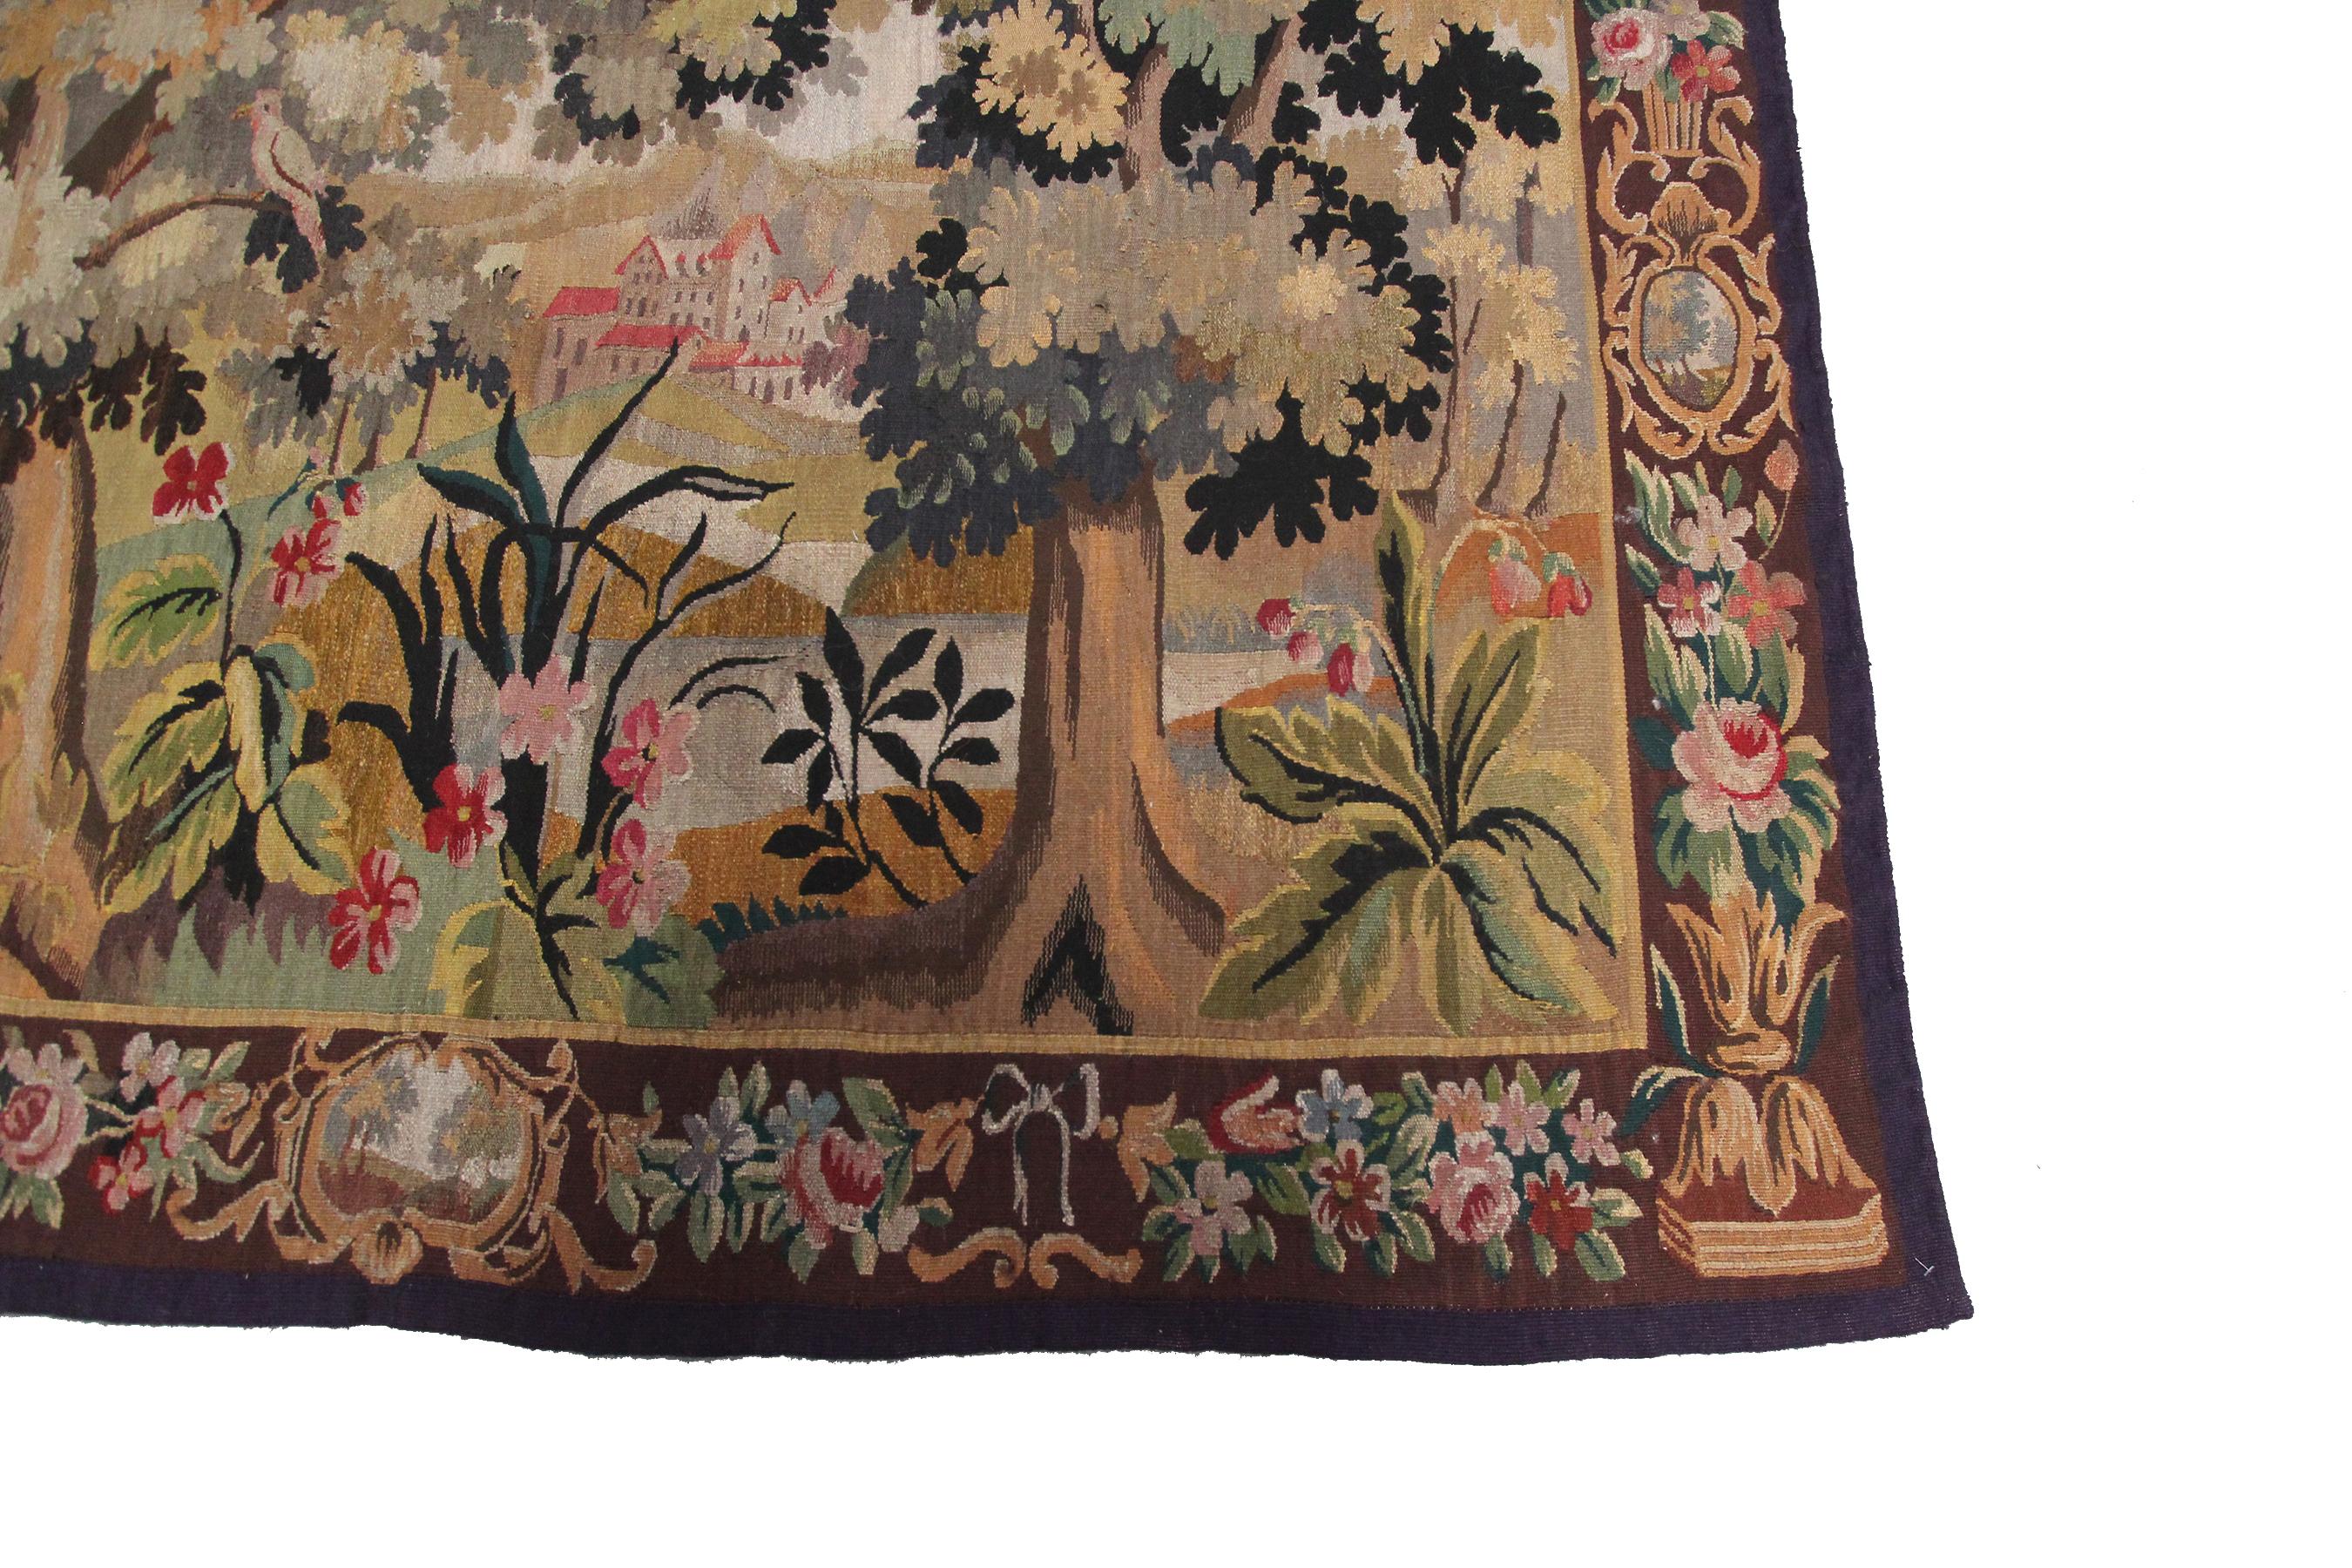 Hand-Woven Antique Tapestry Verdure Tapestry Large Handmade French Tapestry 5X7, 1900 For Sale